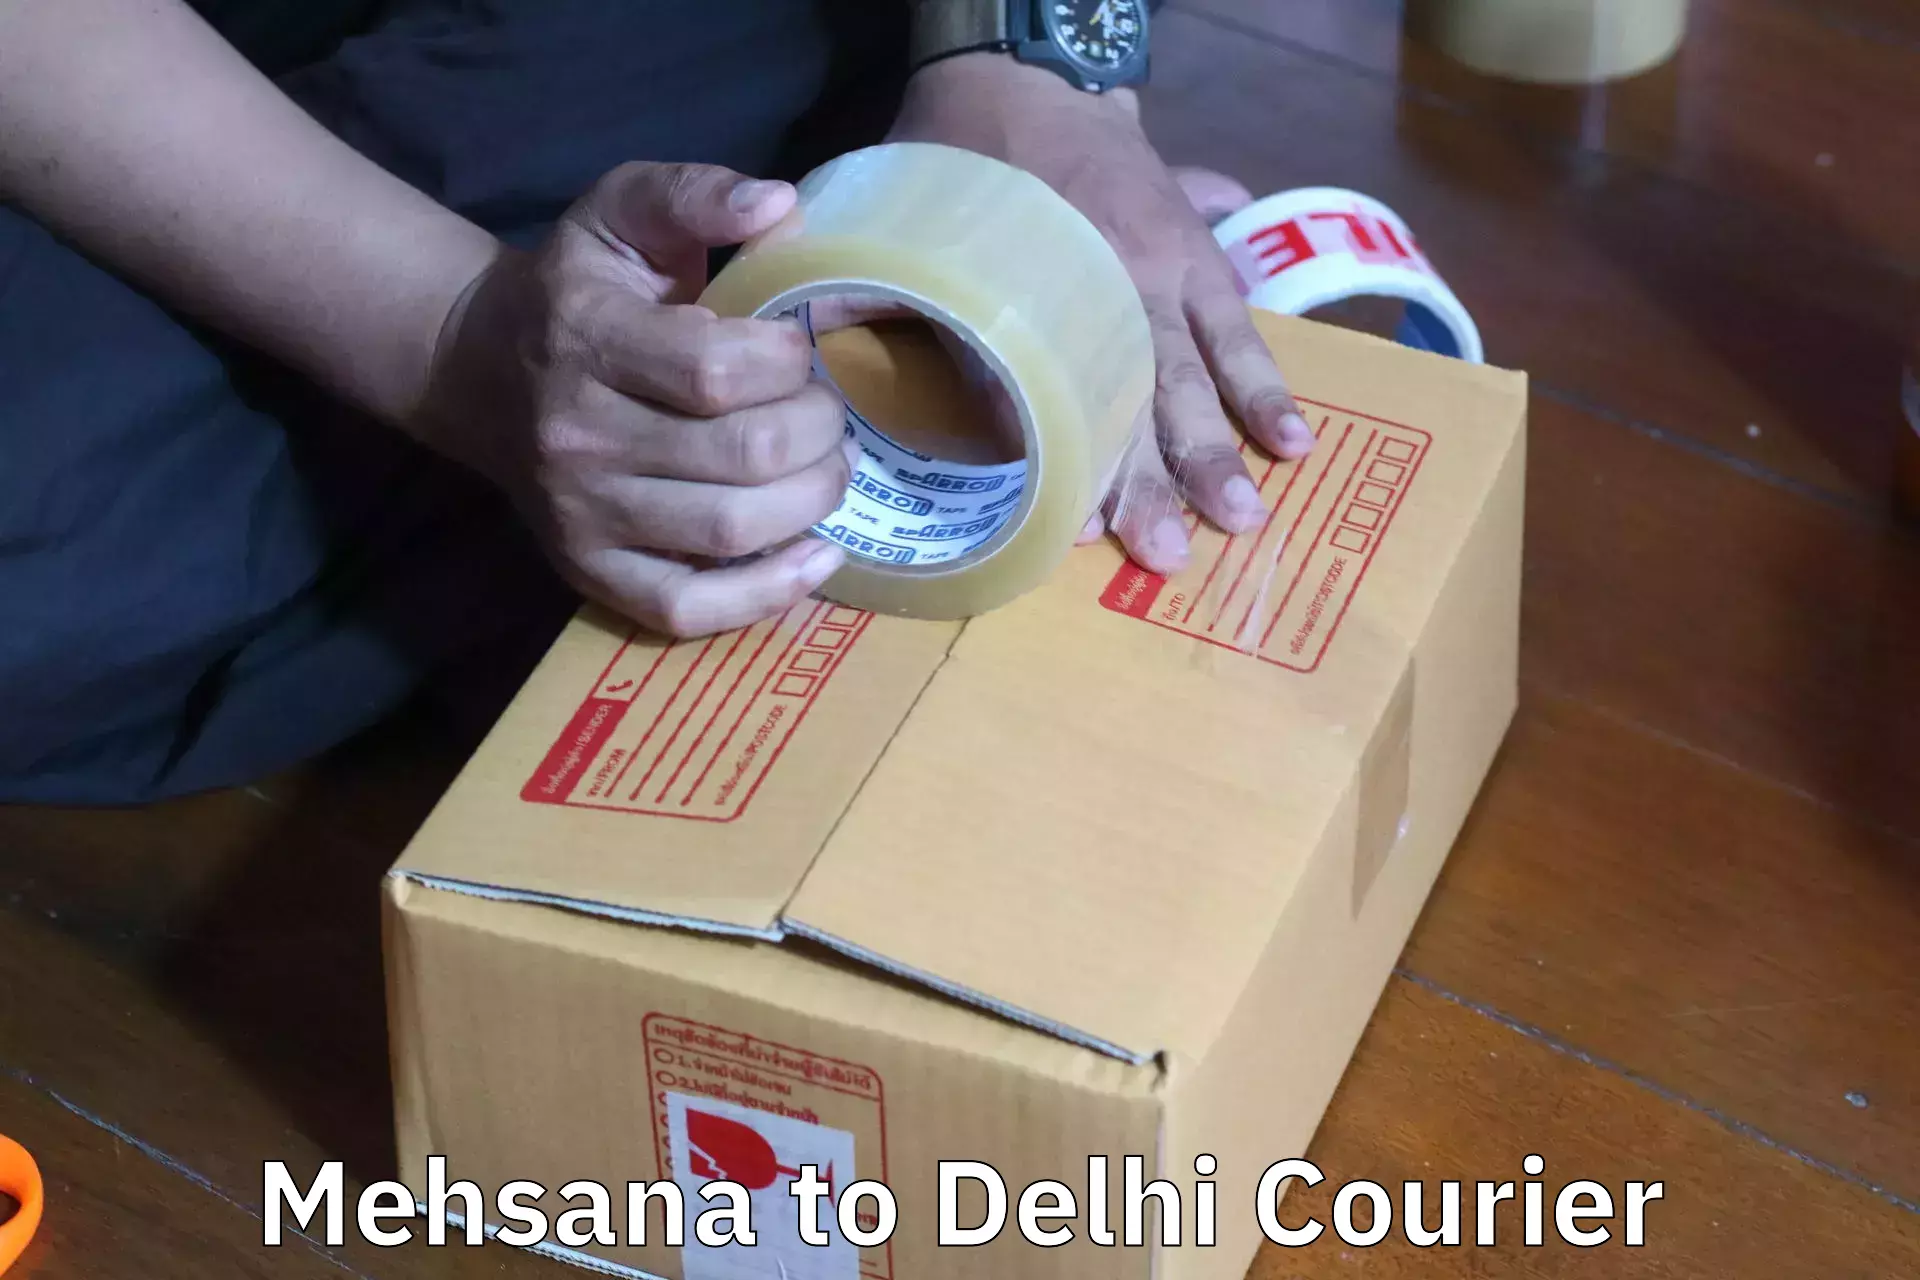 Furniture moving specialists Mehsana to University of Delhi